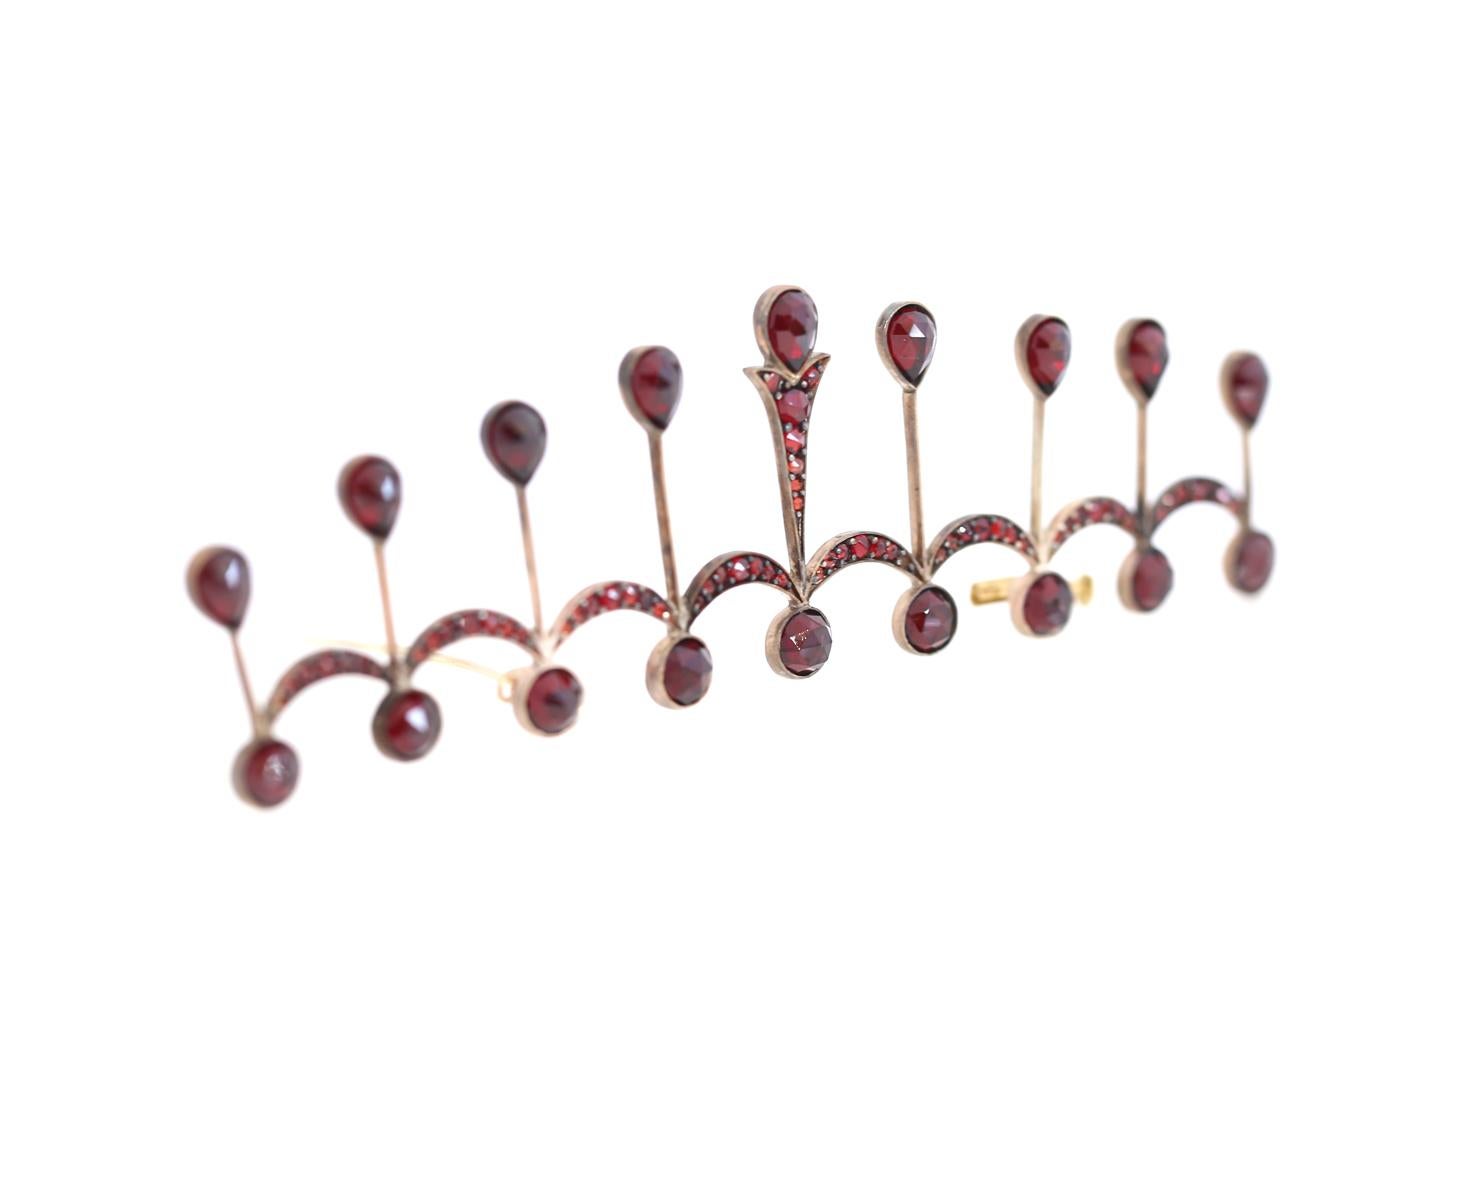 A Garnet Brooch depicting tiara or a crown. Silver with Gold, a technique used at that time. Collectable jewelry from the early 20th century. 
Garnet is known to be a stone of the month of January. Very deep red color. It is an amazing opportunity